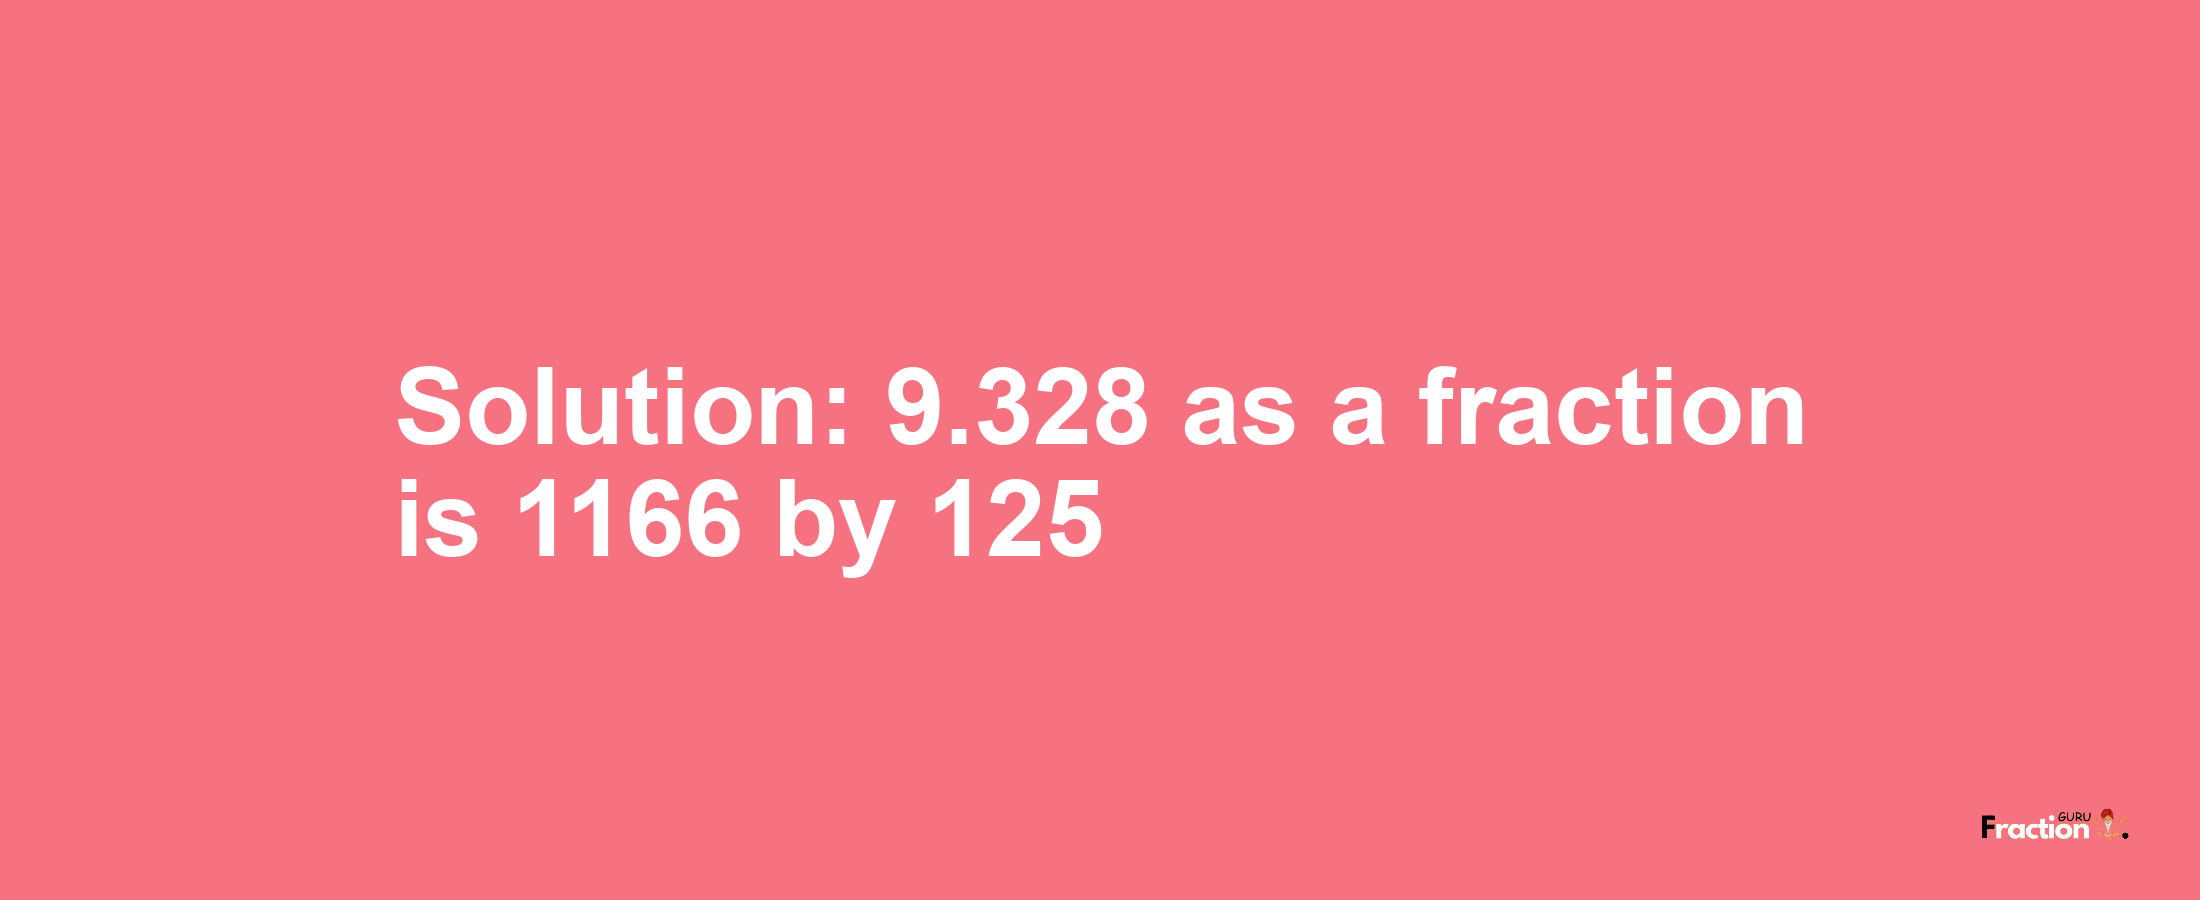 Solution:9.328 as a fraction is 1166/125